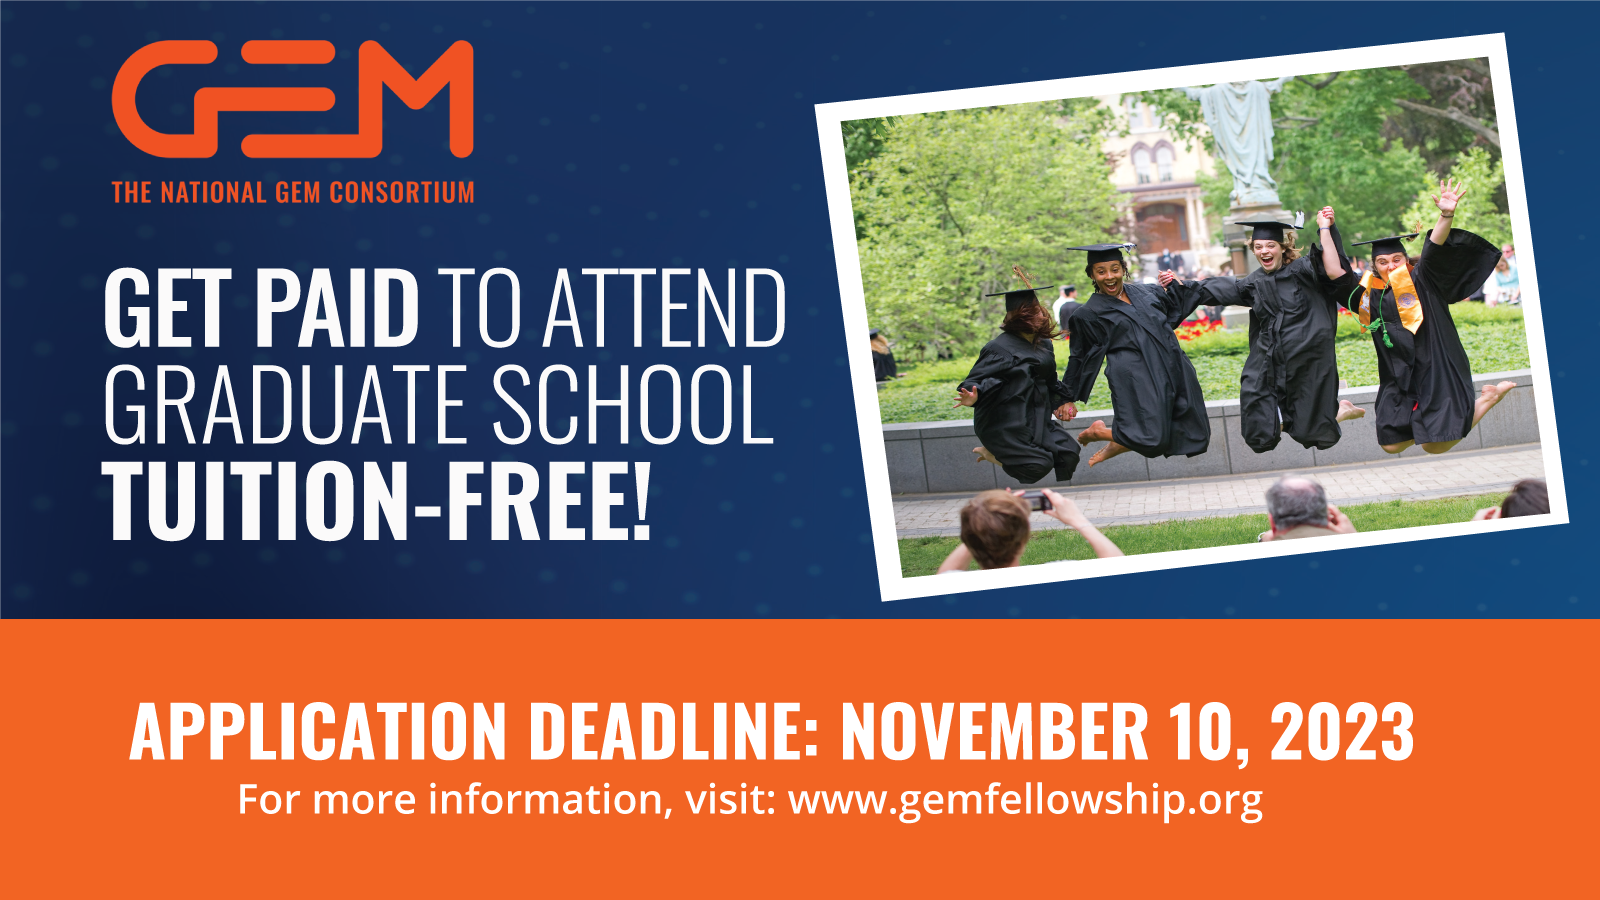 GEM the National GEM Consortium. Get Paid to Attend Graduate School Tuition Free! Application Deadline: November 10, 2023. For more Information visit: www.gemfellowship.org